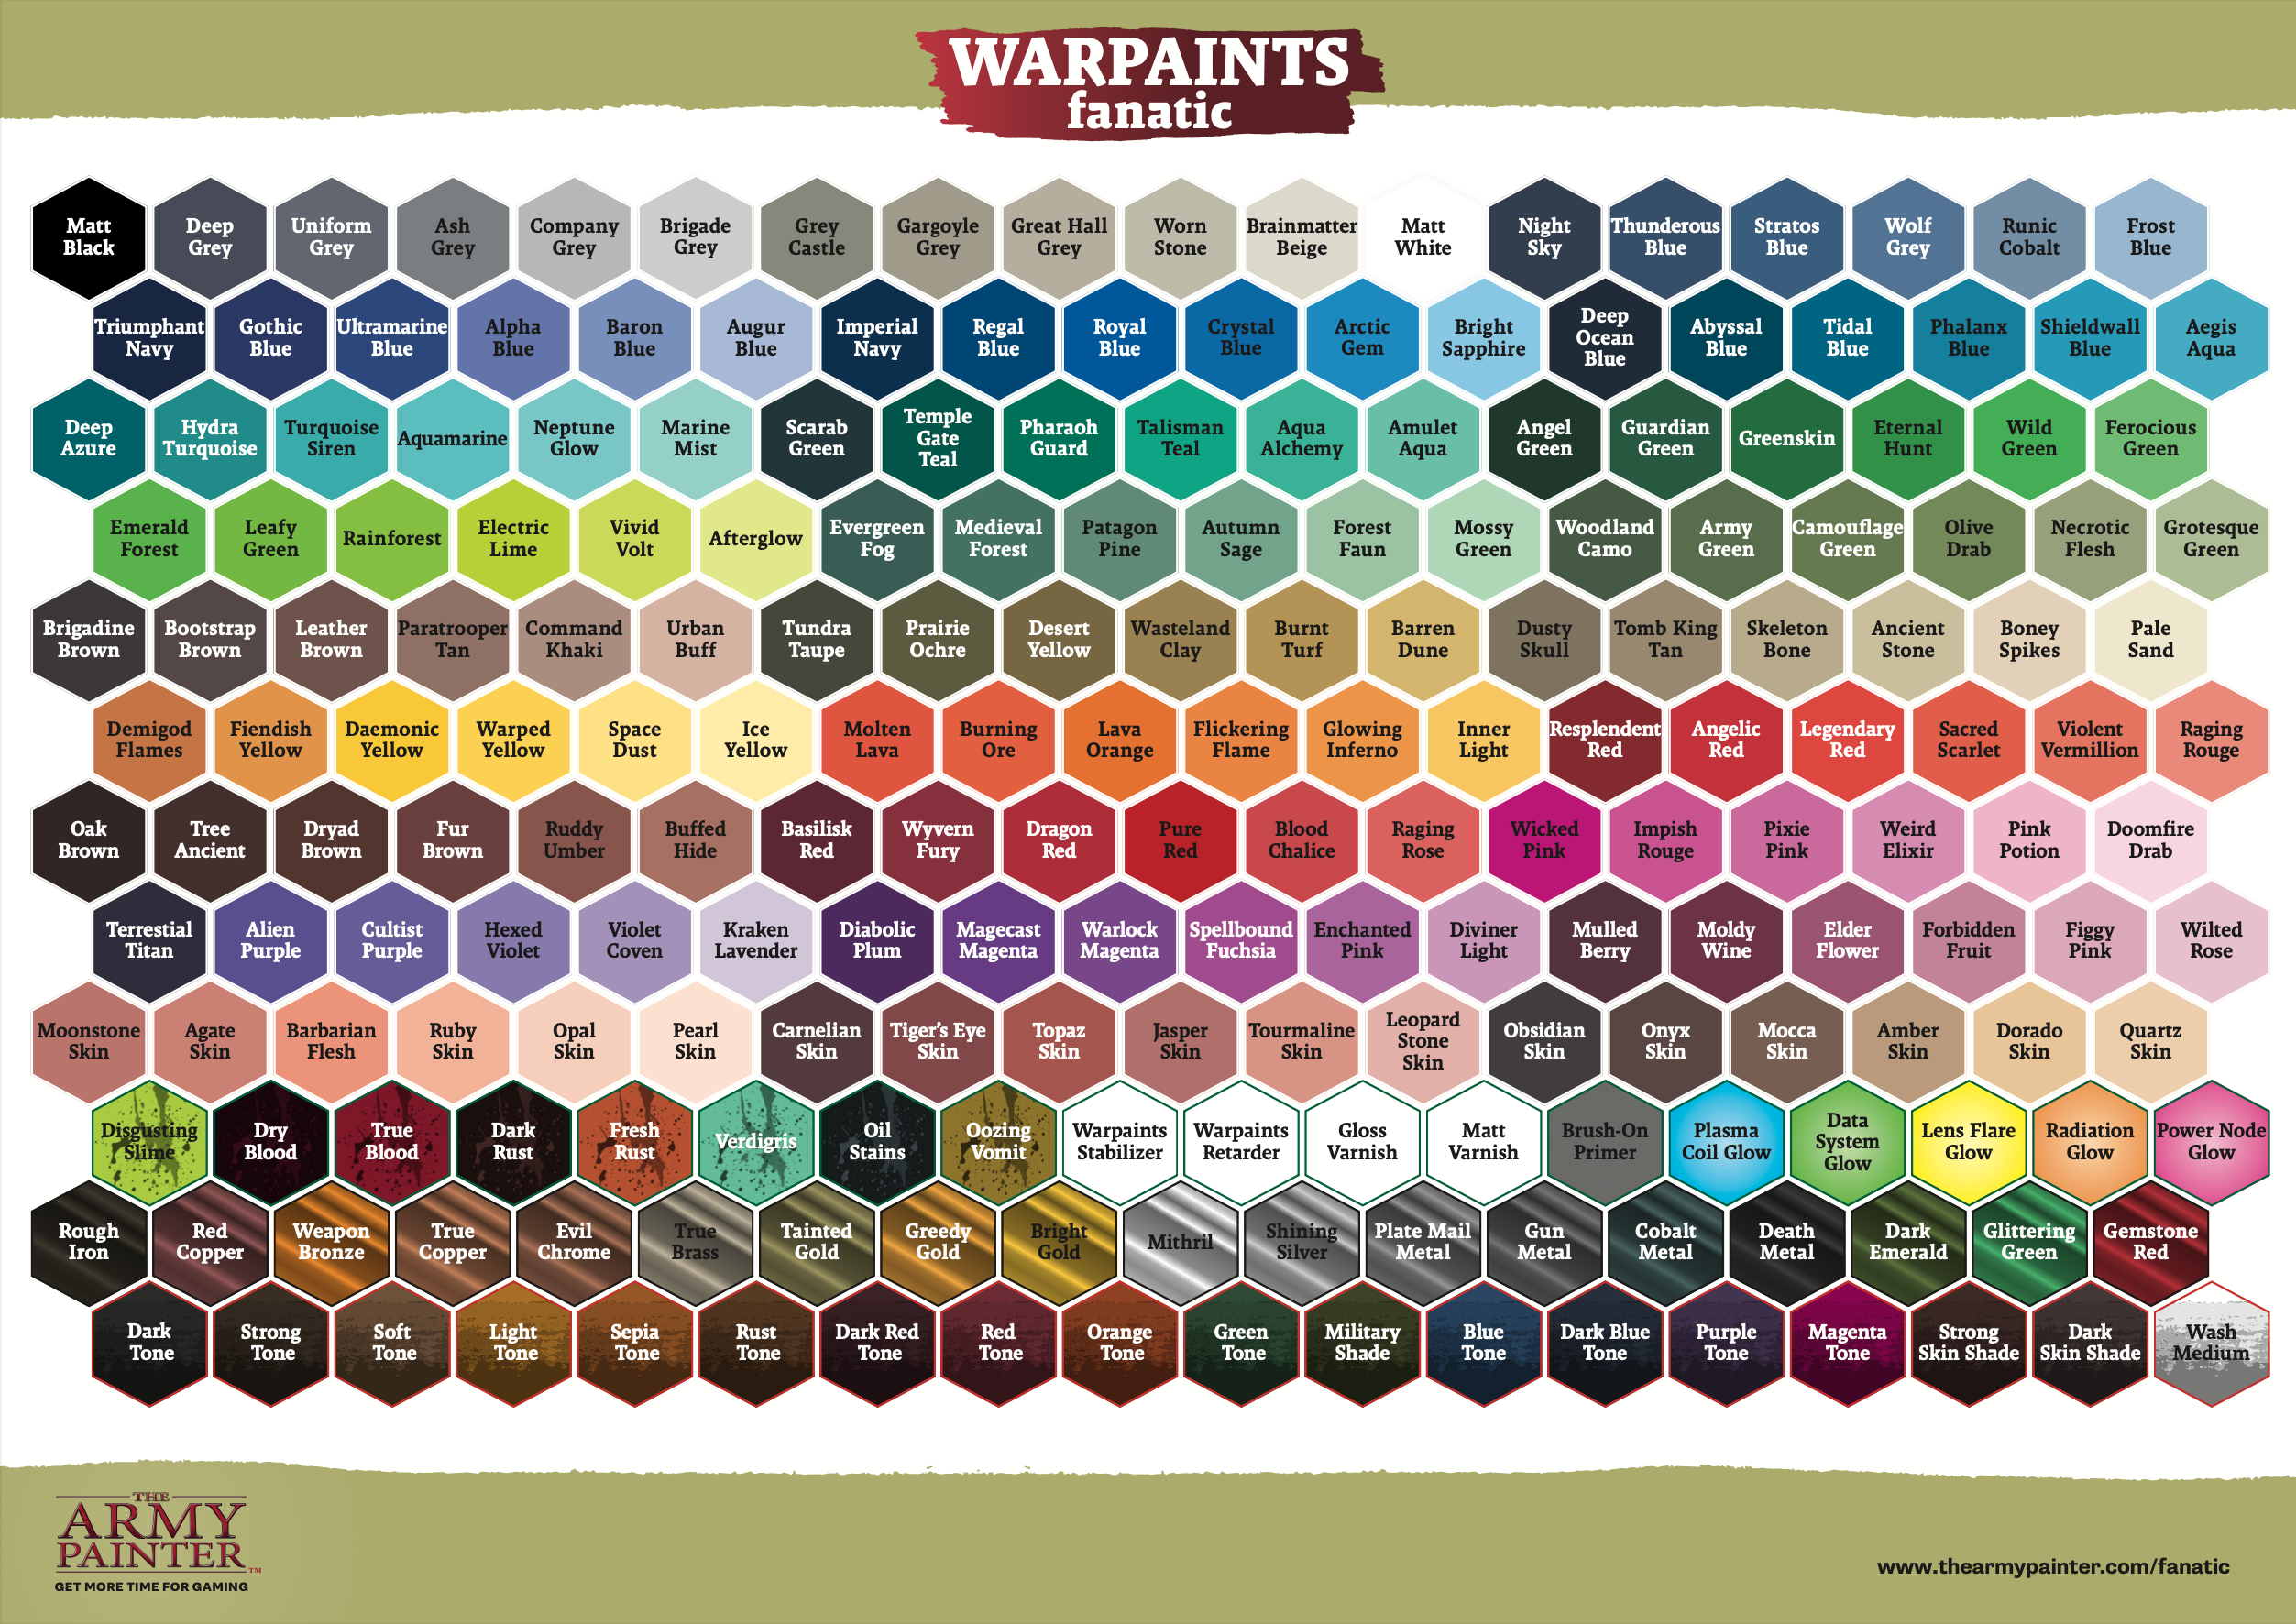 Army Painter Warpaints Fanatic: Bright Sapphire 18ml - Loaded Dice